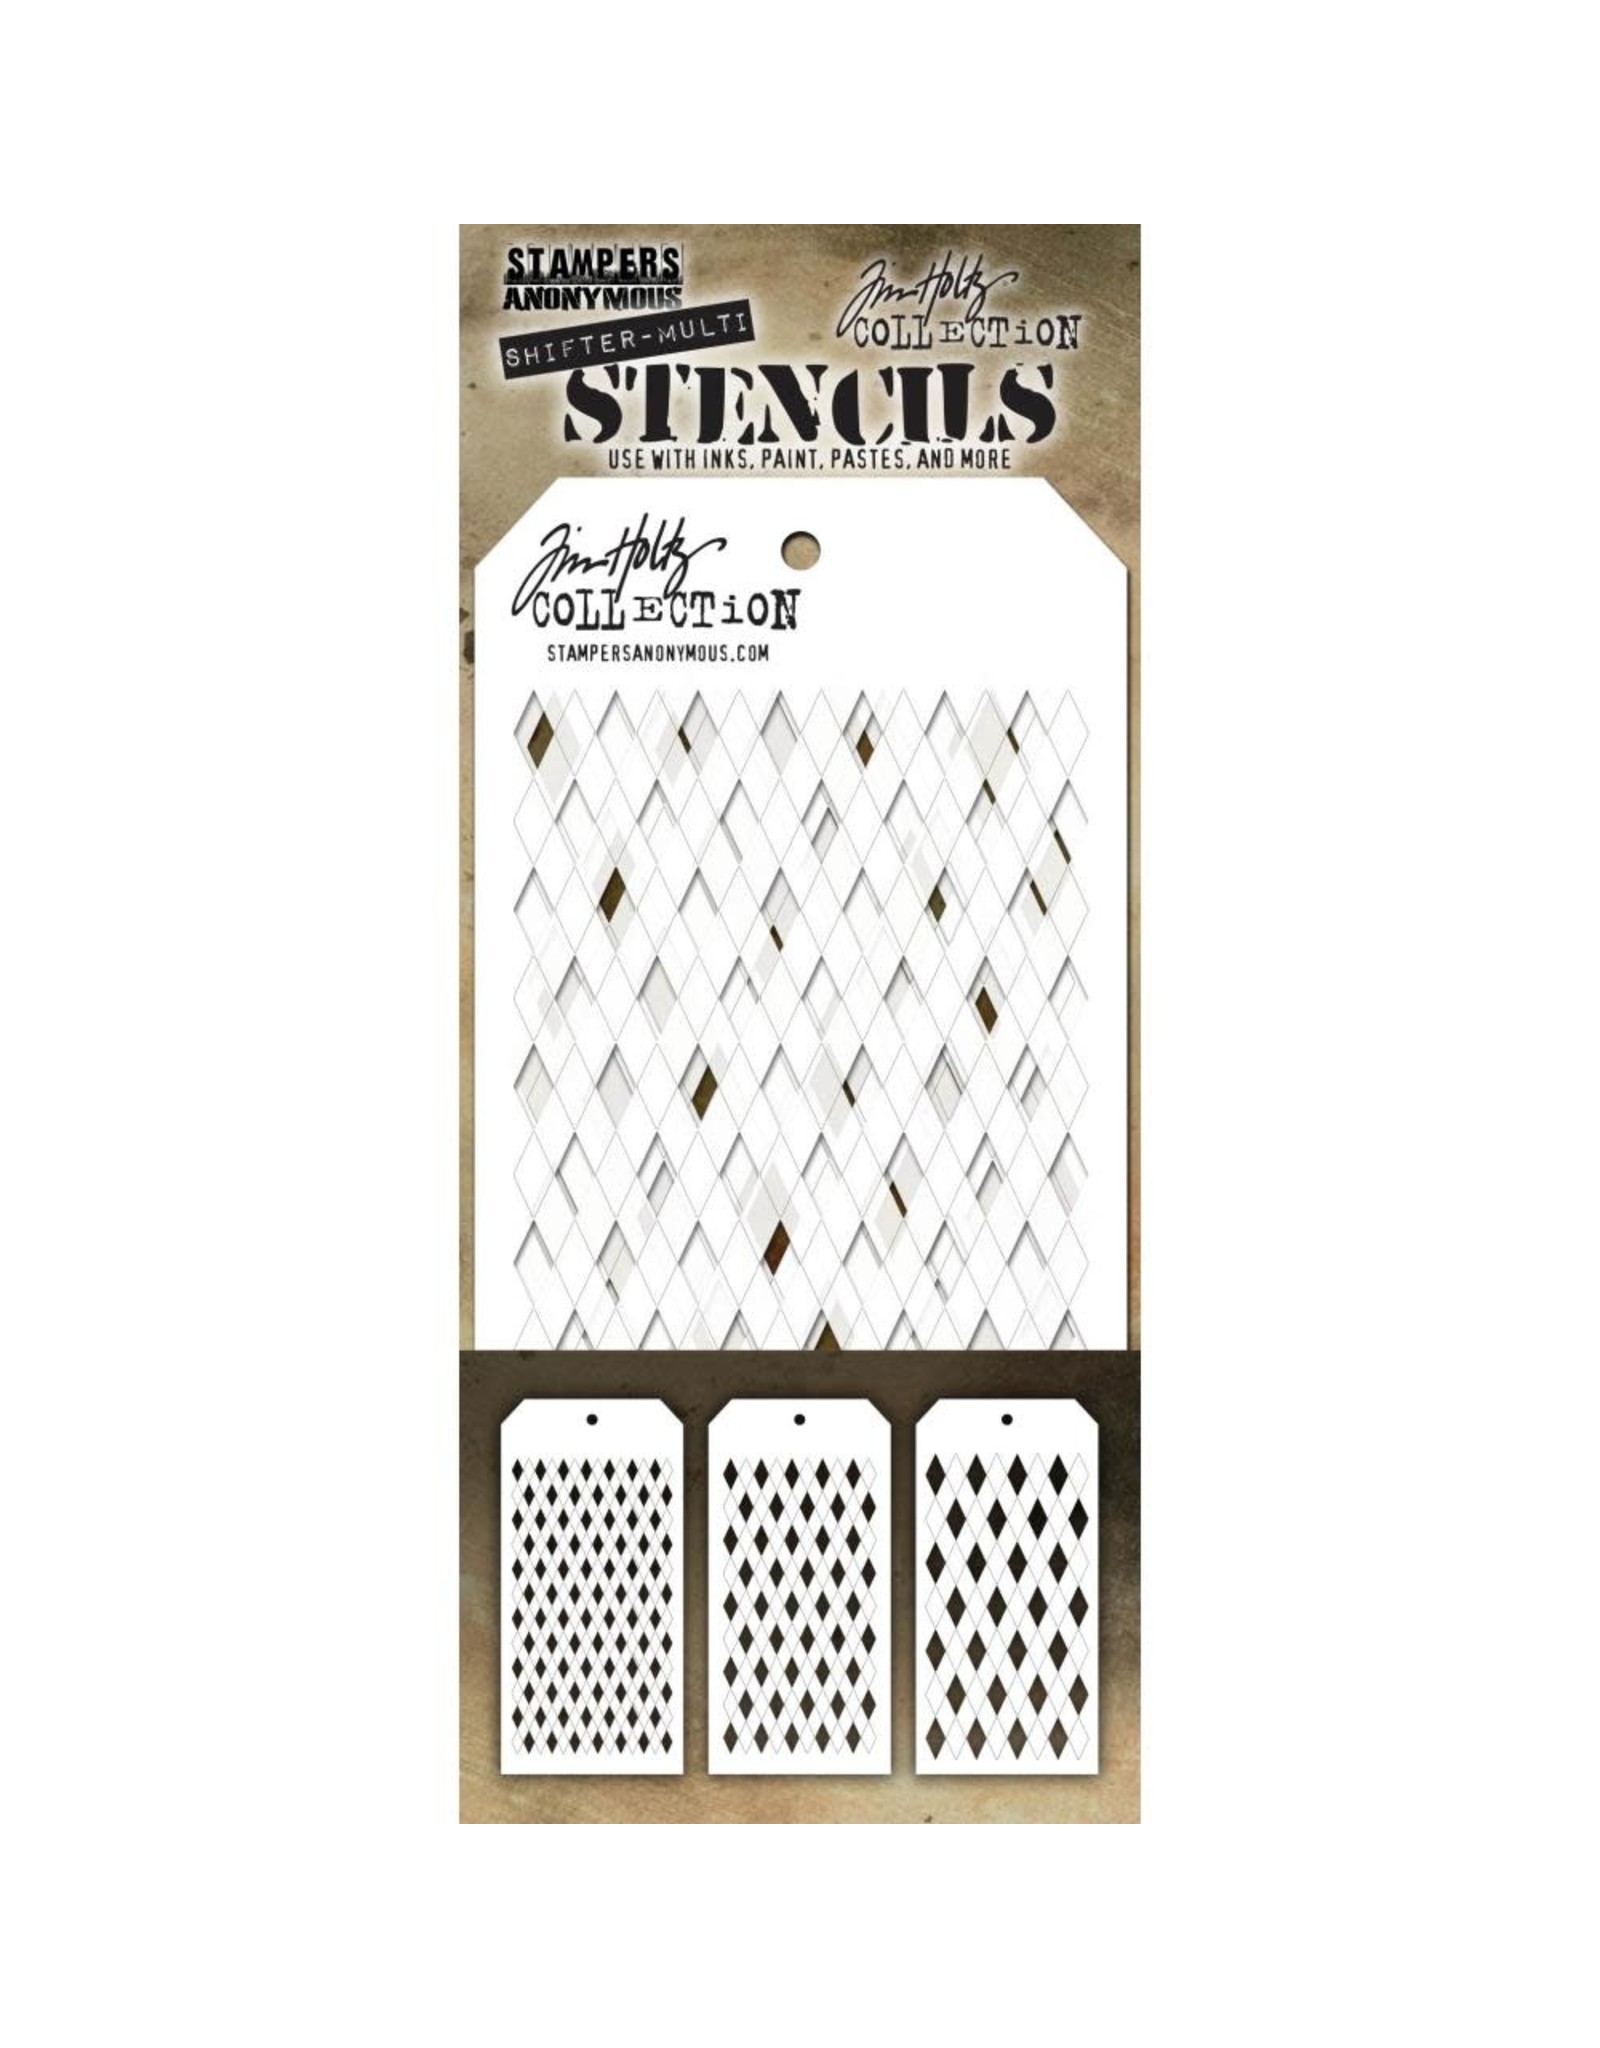 STAMPERS ANONYMOUS TIM HOLTZ SHIFTER MULTI HARLEQUIN STENCIL SET 3/PK